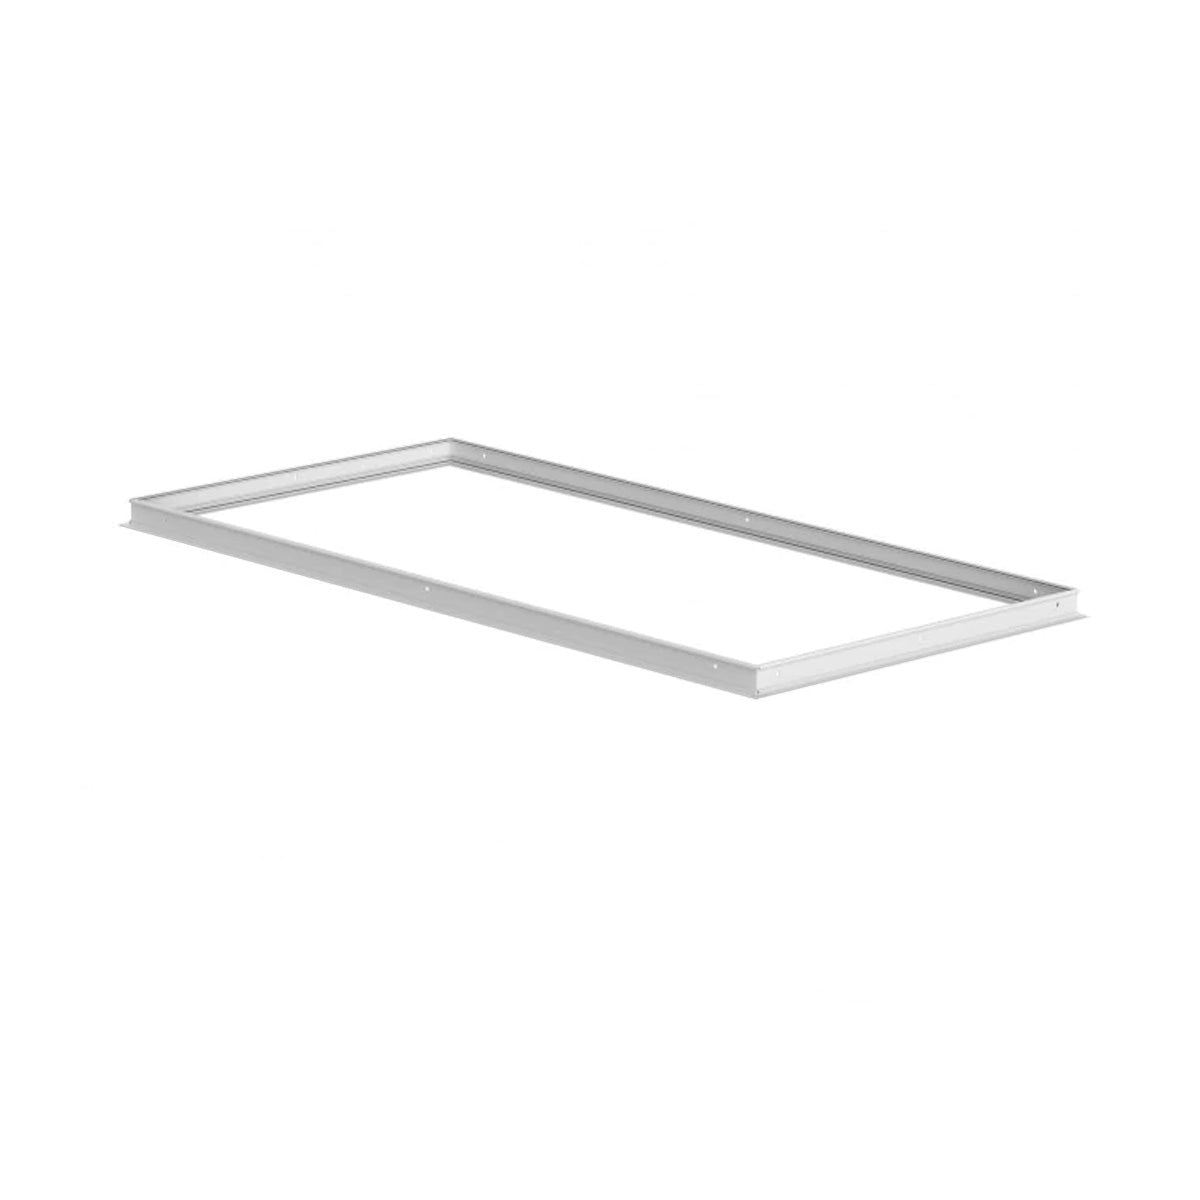 2x4 Ceiling Frame & Mounting Kit for Archipelago PlanoArch